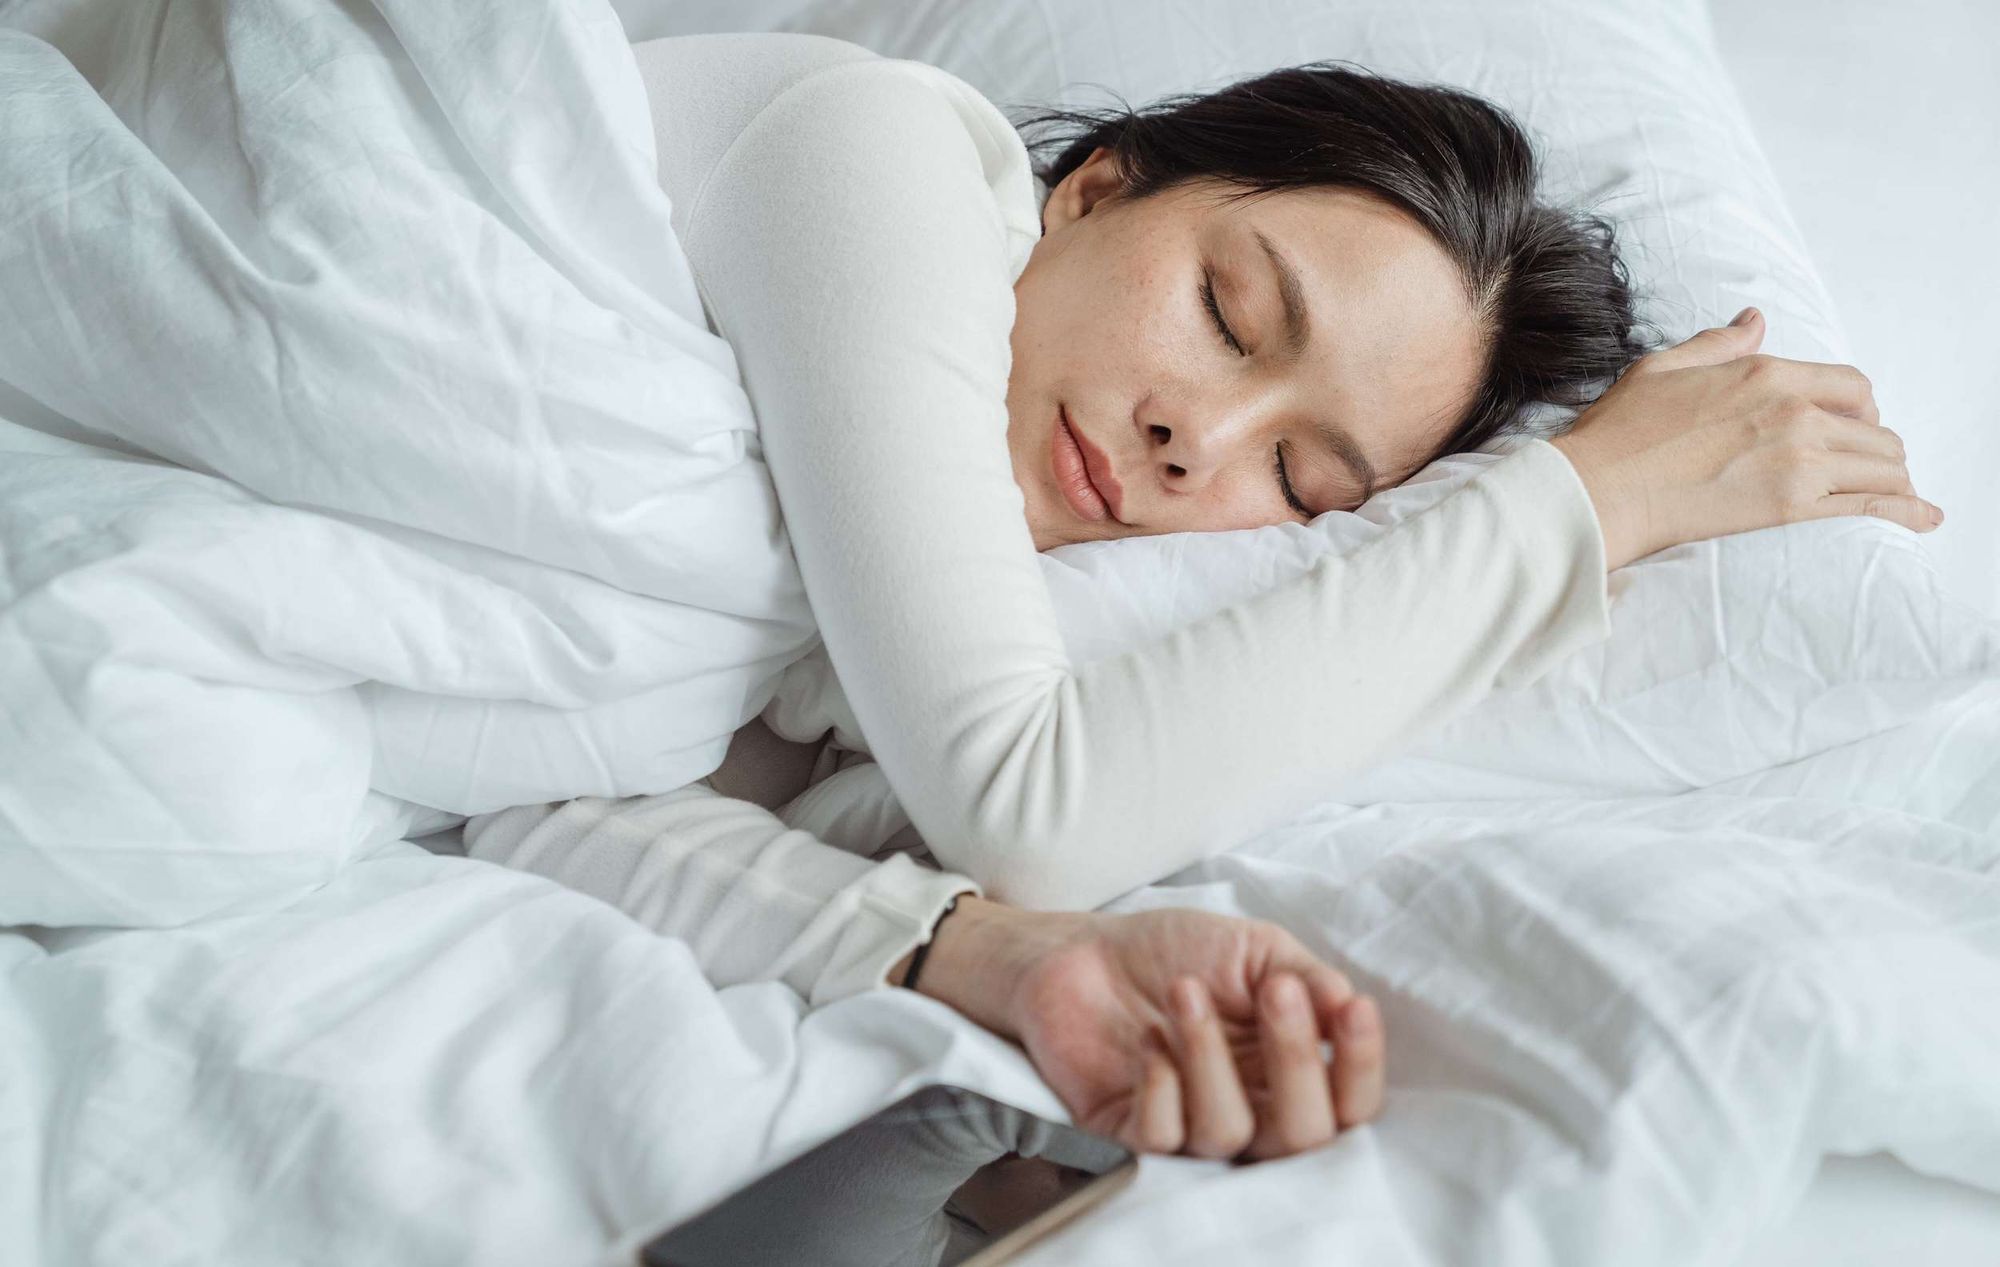 A woman with dark hair sleeping on white bedsheets next to her mobile phone.